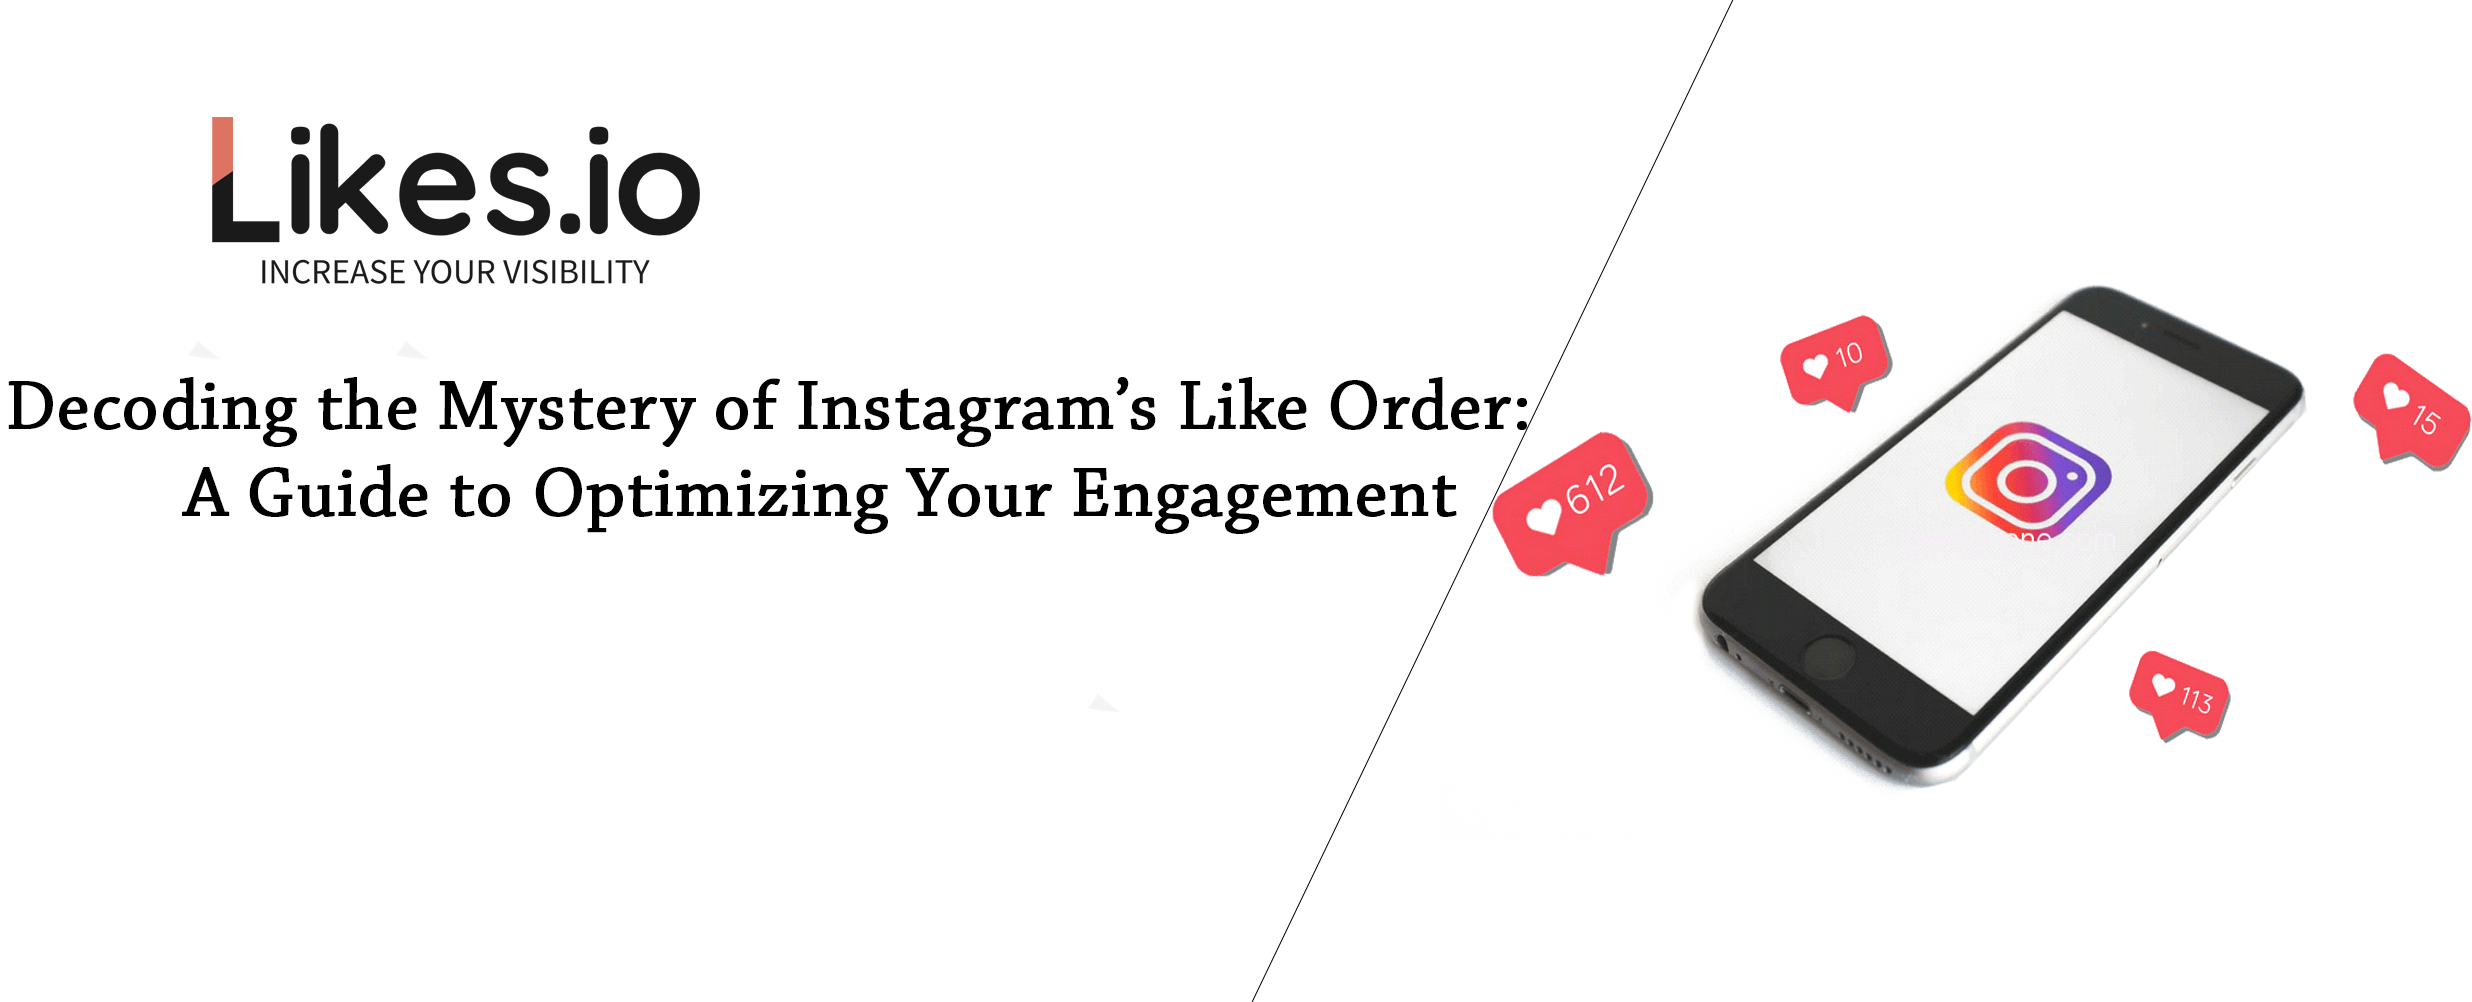 Decoding the Mystery of Instagram’s Like Order: A Guide to Optimizing Your Engagement